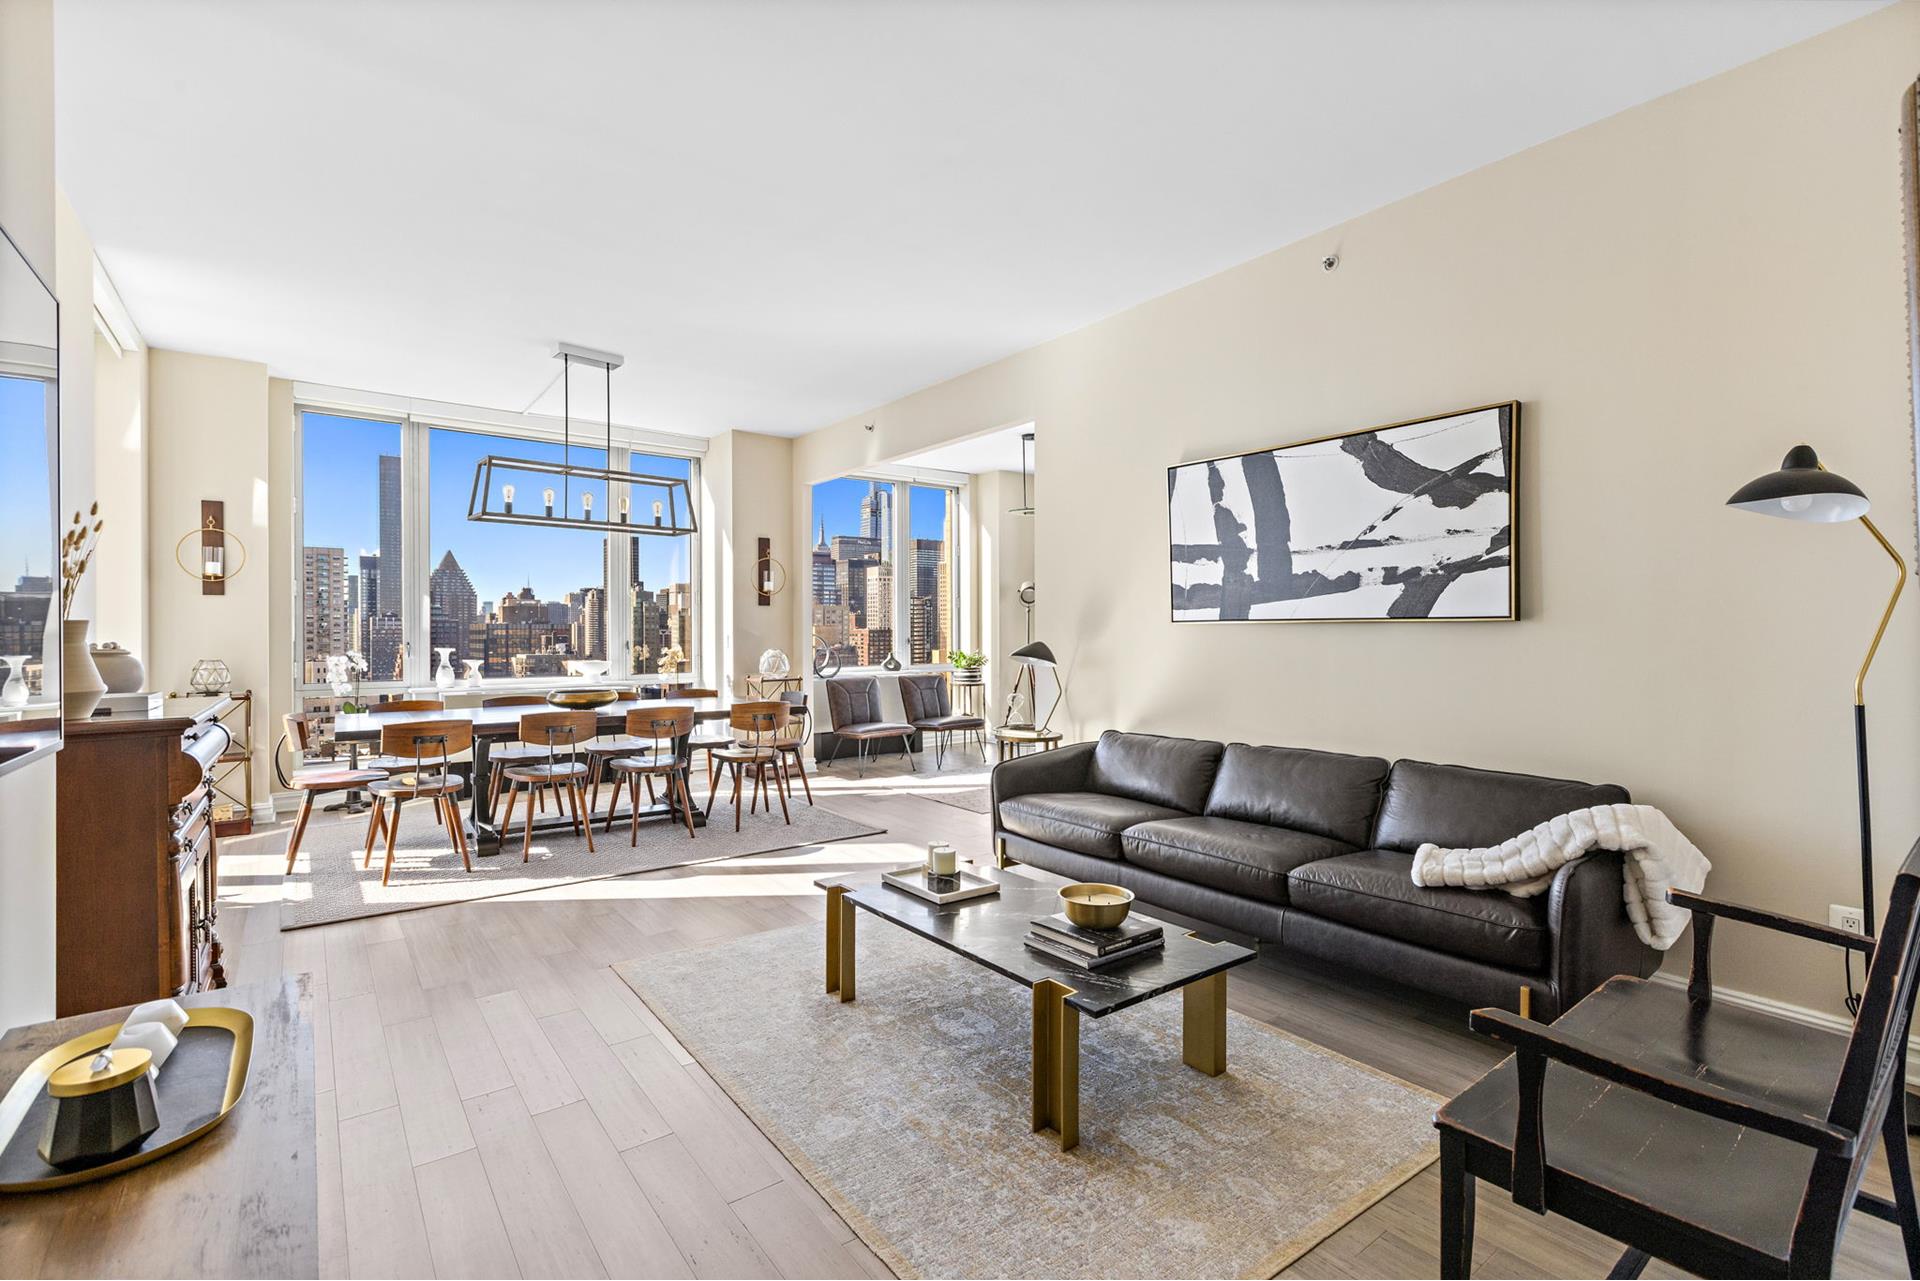 401 East 60th Street 26A, Lenox Hill, Upper East Side, NYC - 3 Bedrooms  
3.5 Bathrooms  
6 Rooms - 